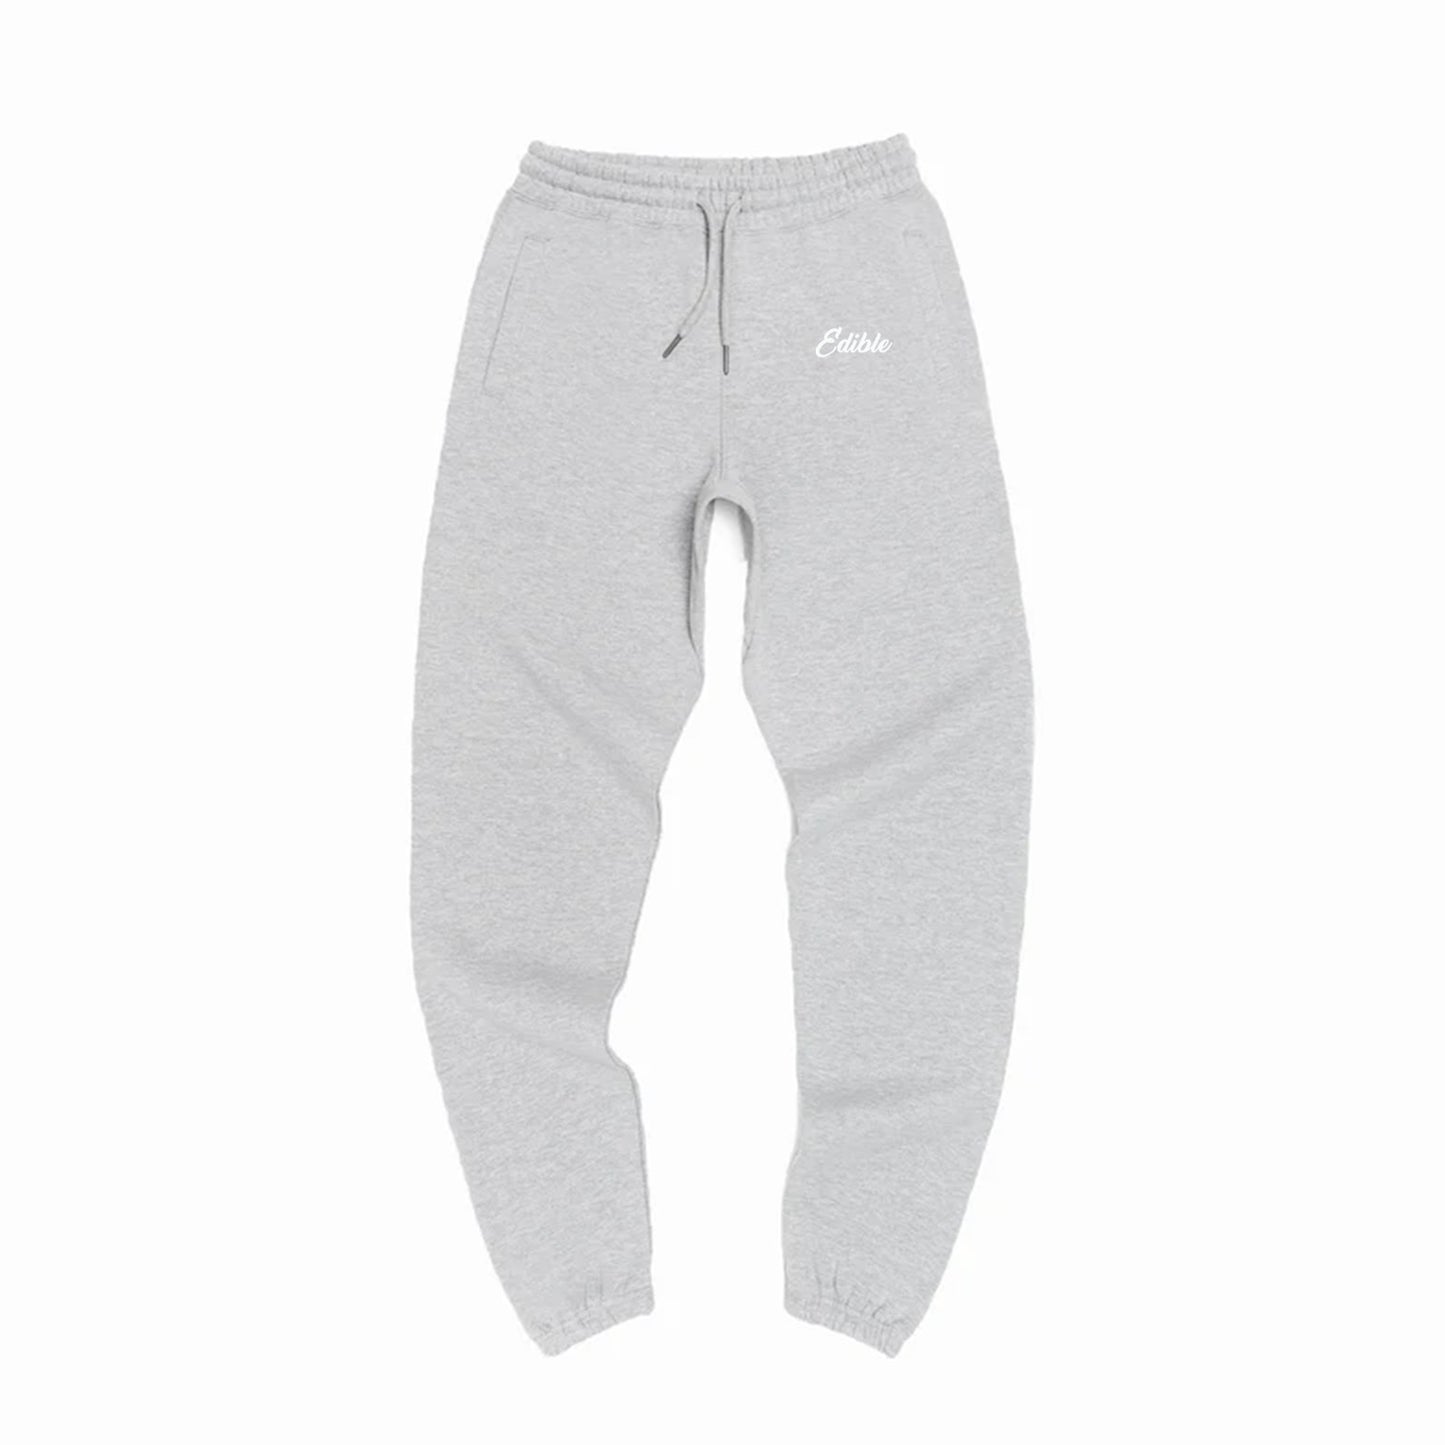 "Edible" Embroidered Sweatpants